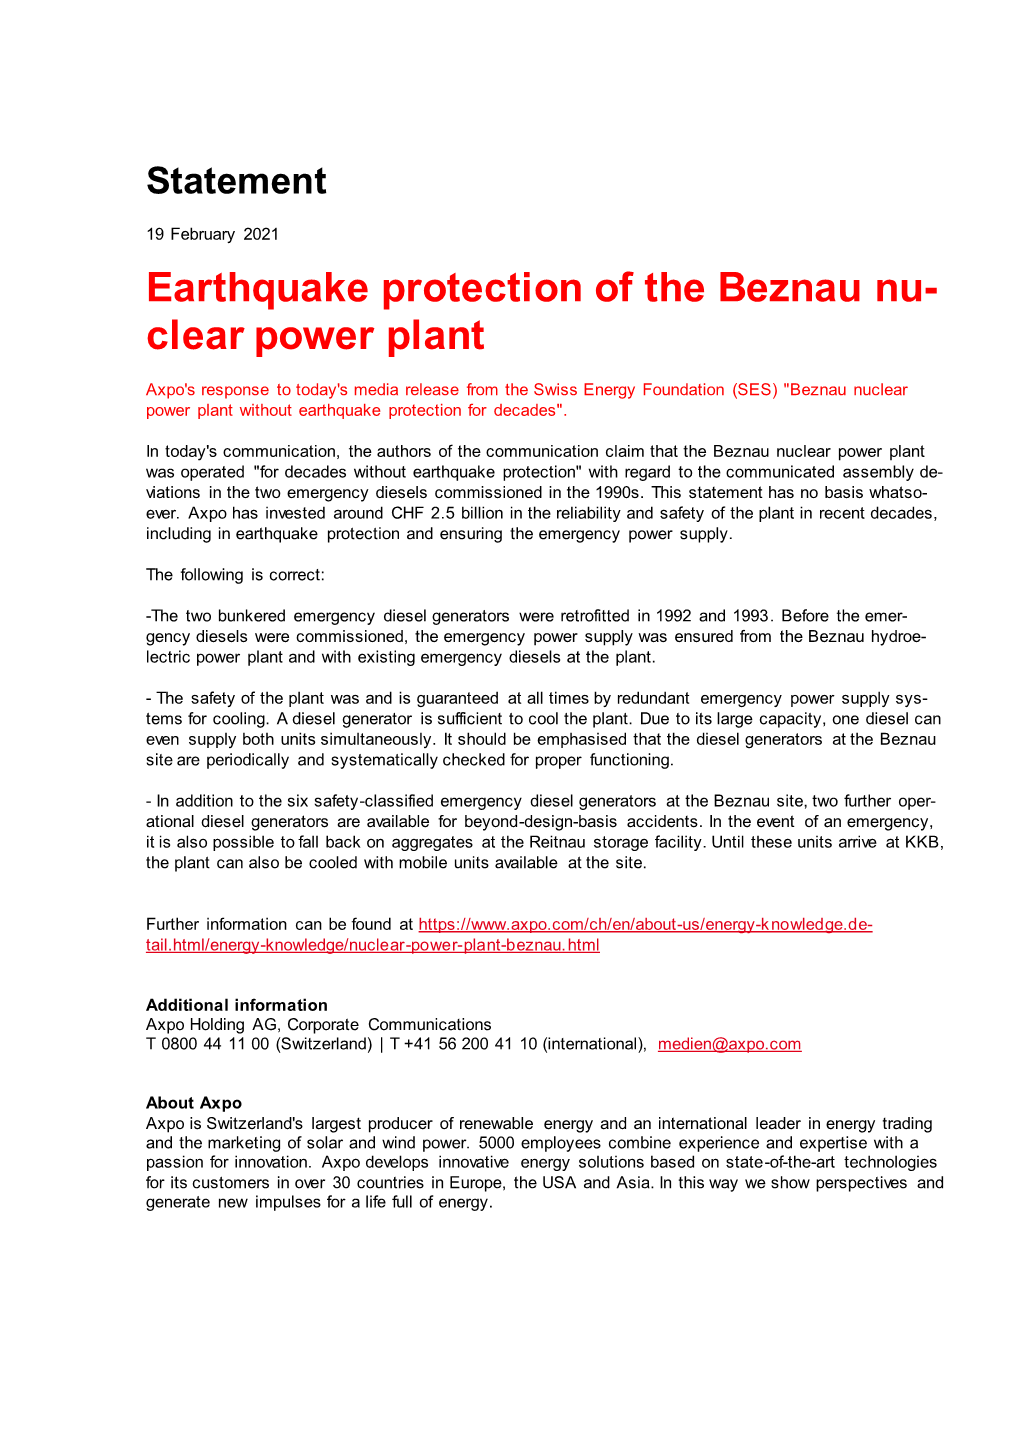 Earthquake Protection of the Beznau Nu- Clear Power Plant